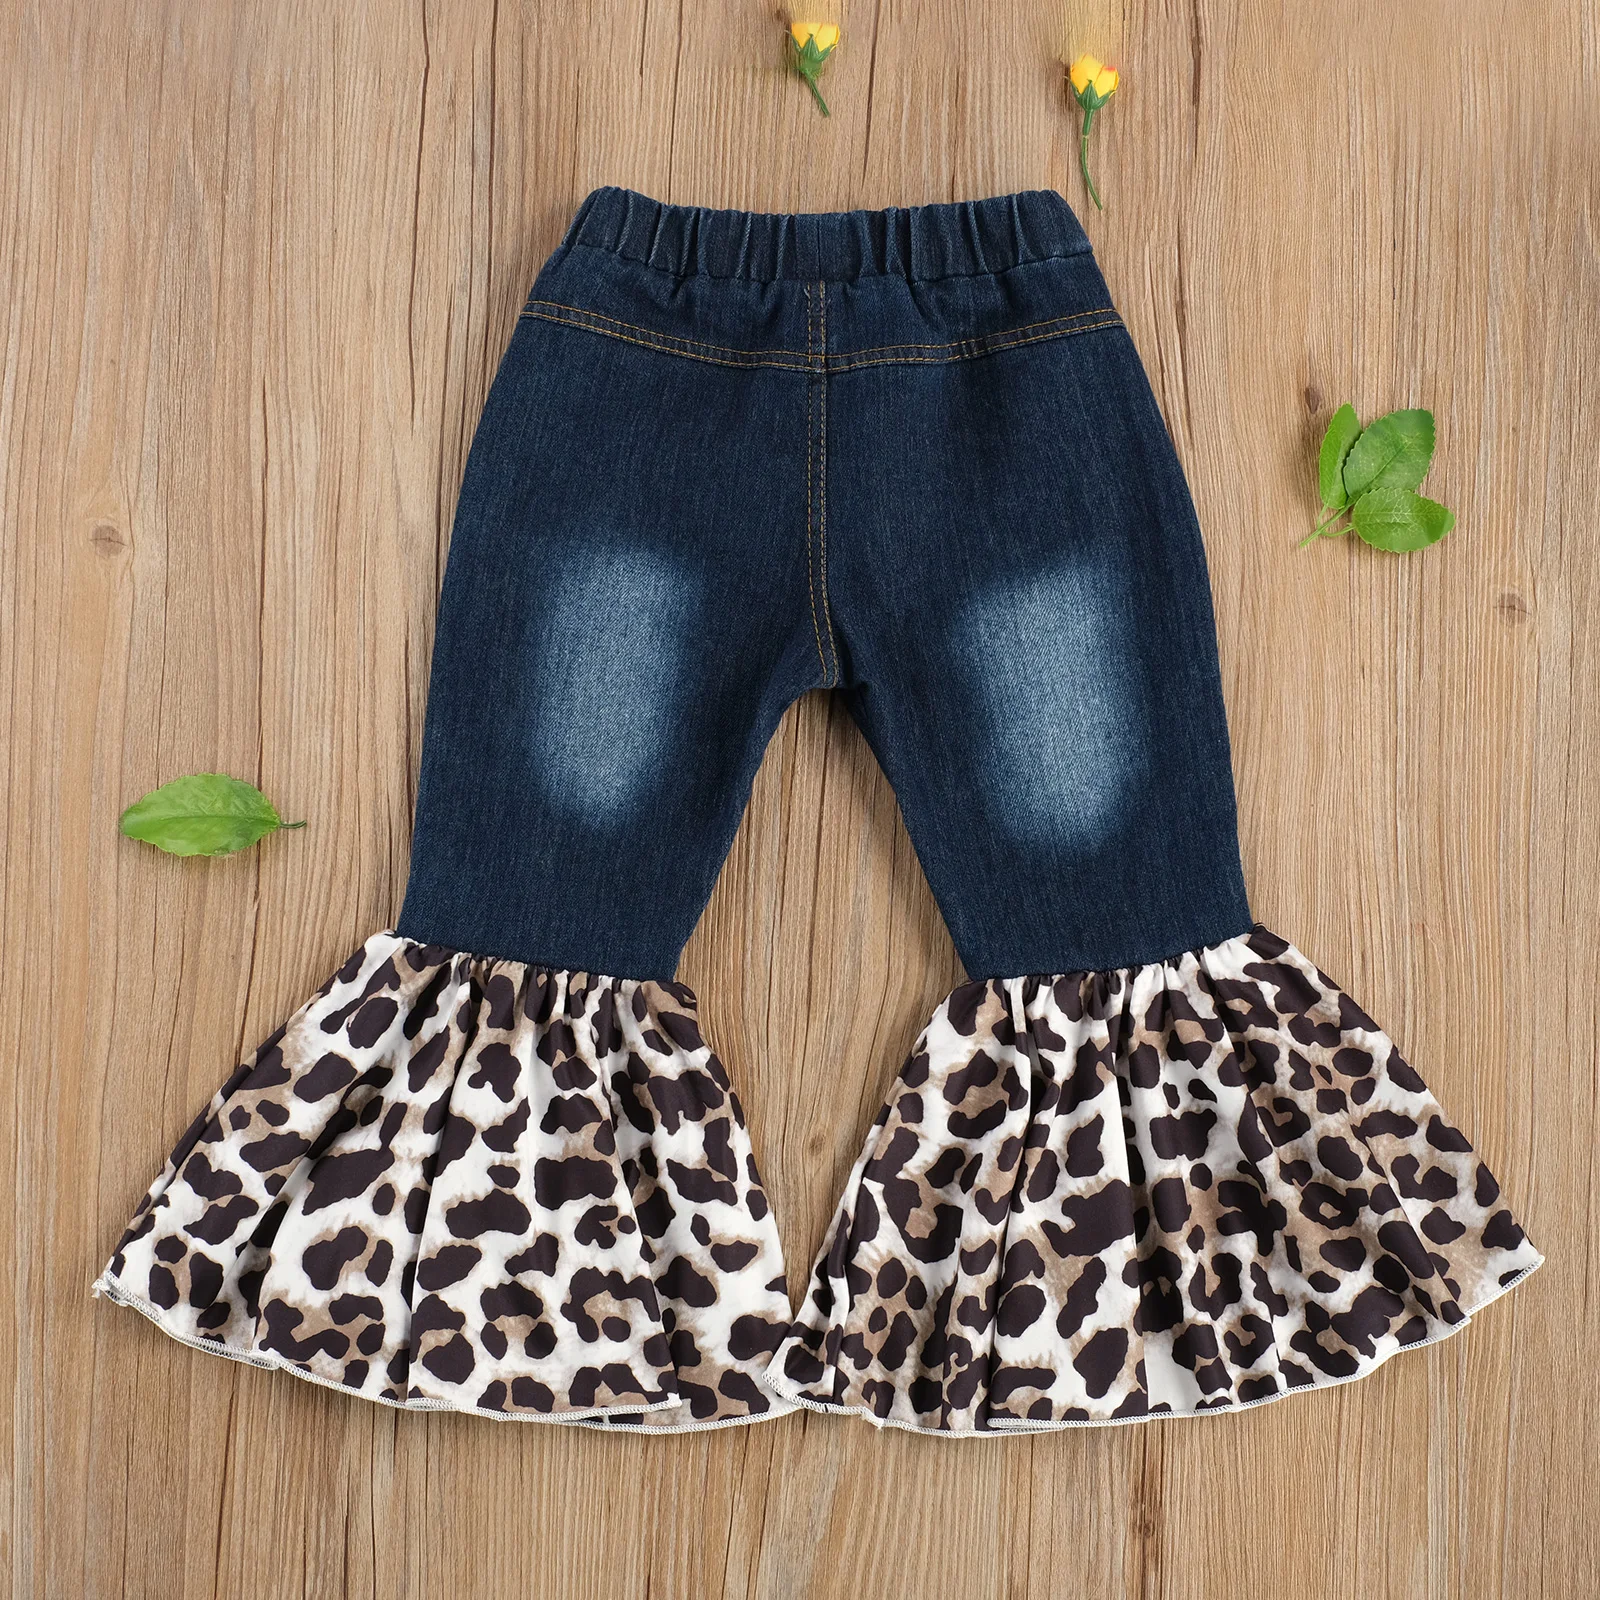 

Pudcoco 2020 Autumn 2-7Y Kids Toddler Baby Girls Jeans Leopard Print Flared Pockets Pants Boot Cut Denim Long Trousers